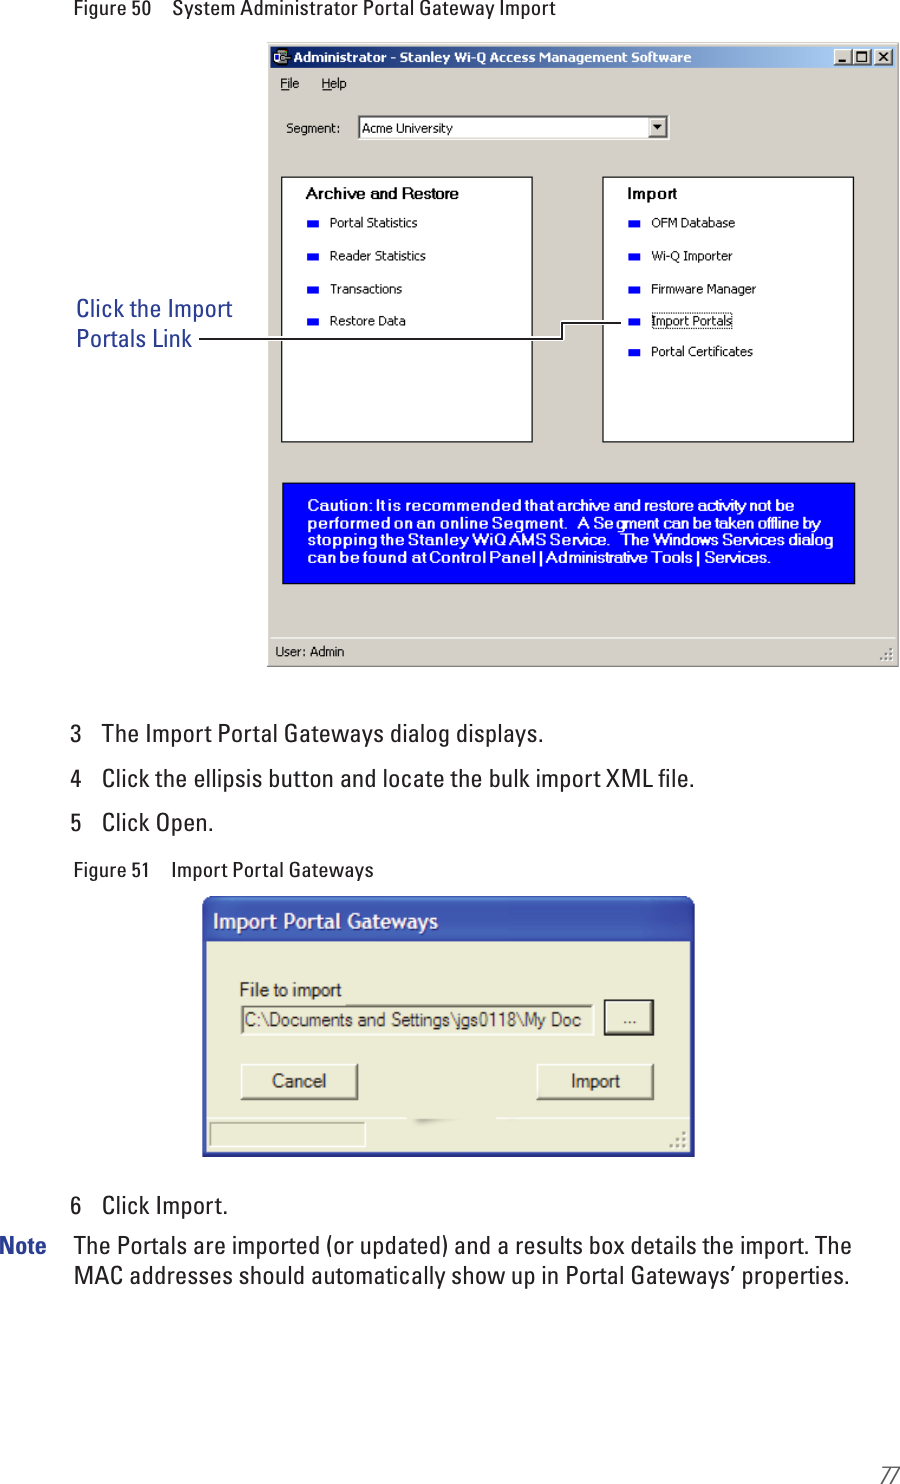 77Figure 50  System Administrator Portal Gateway Import3  The Import Portal Gateways dialog displays.4  Click the ellipsis button and locate the bulk import XML ﬁle.5  Click Open.Figure 51  Import Portal Gateways6  Click Import.Note  The Portals are imported (or updated) and a results box details the import. The MAC addresses should automatically show up in Portal Gateways’ properties.Click the ImportPortals Link